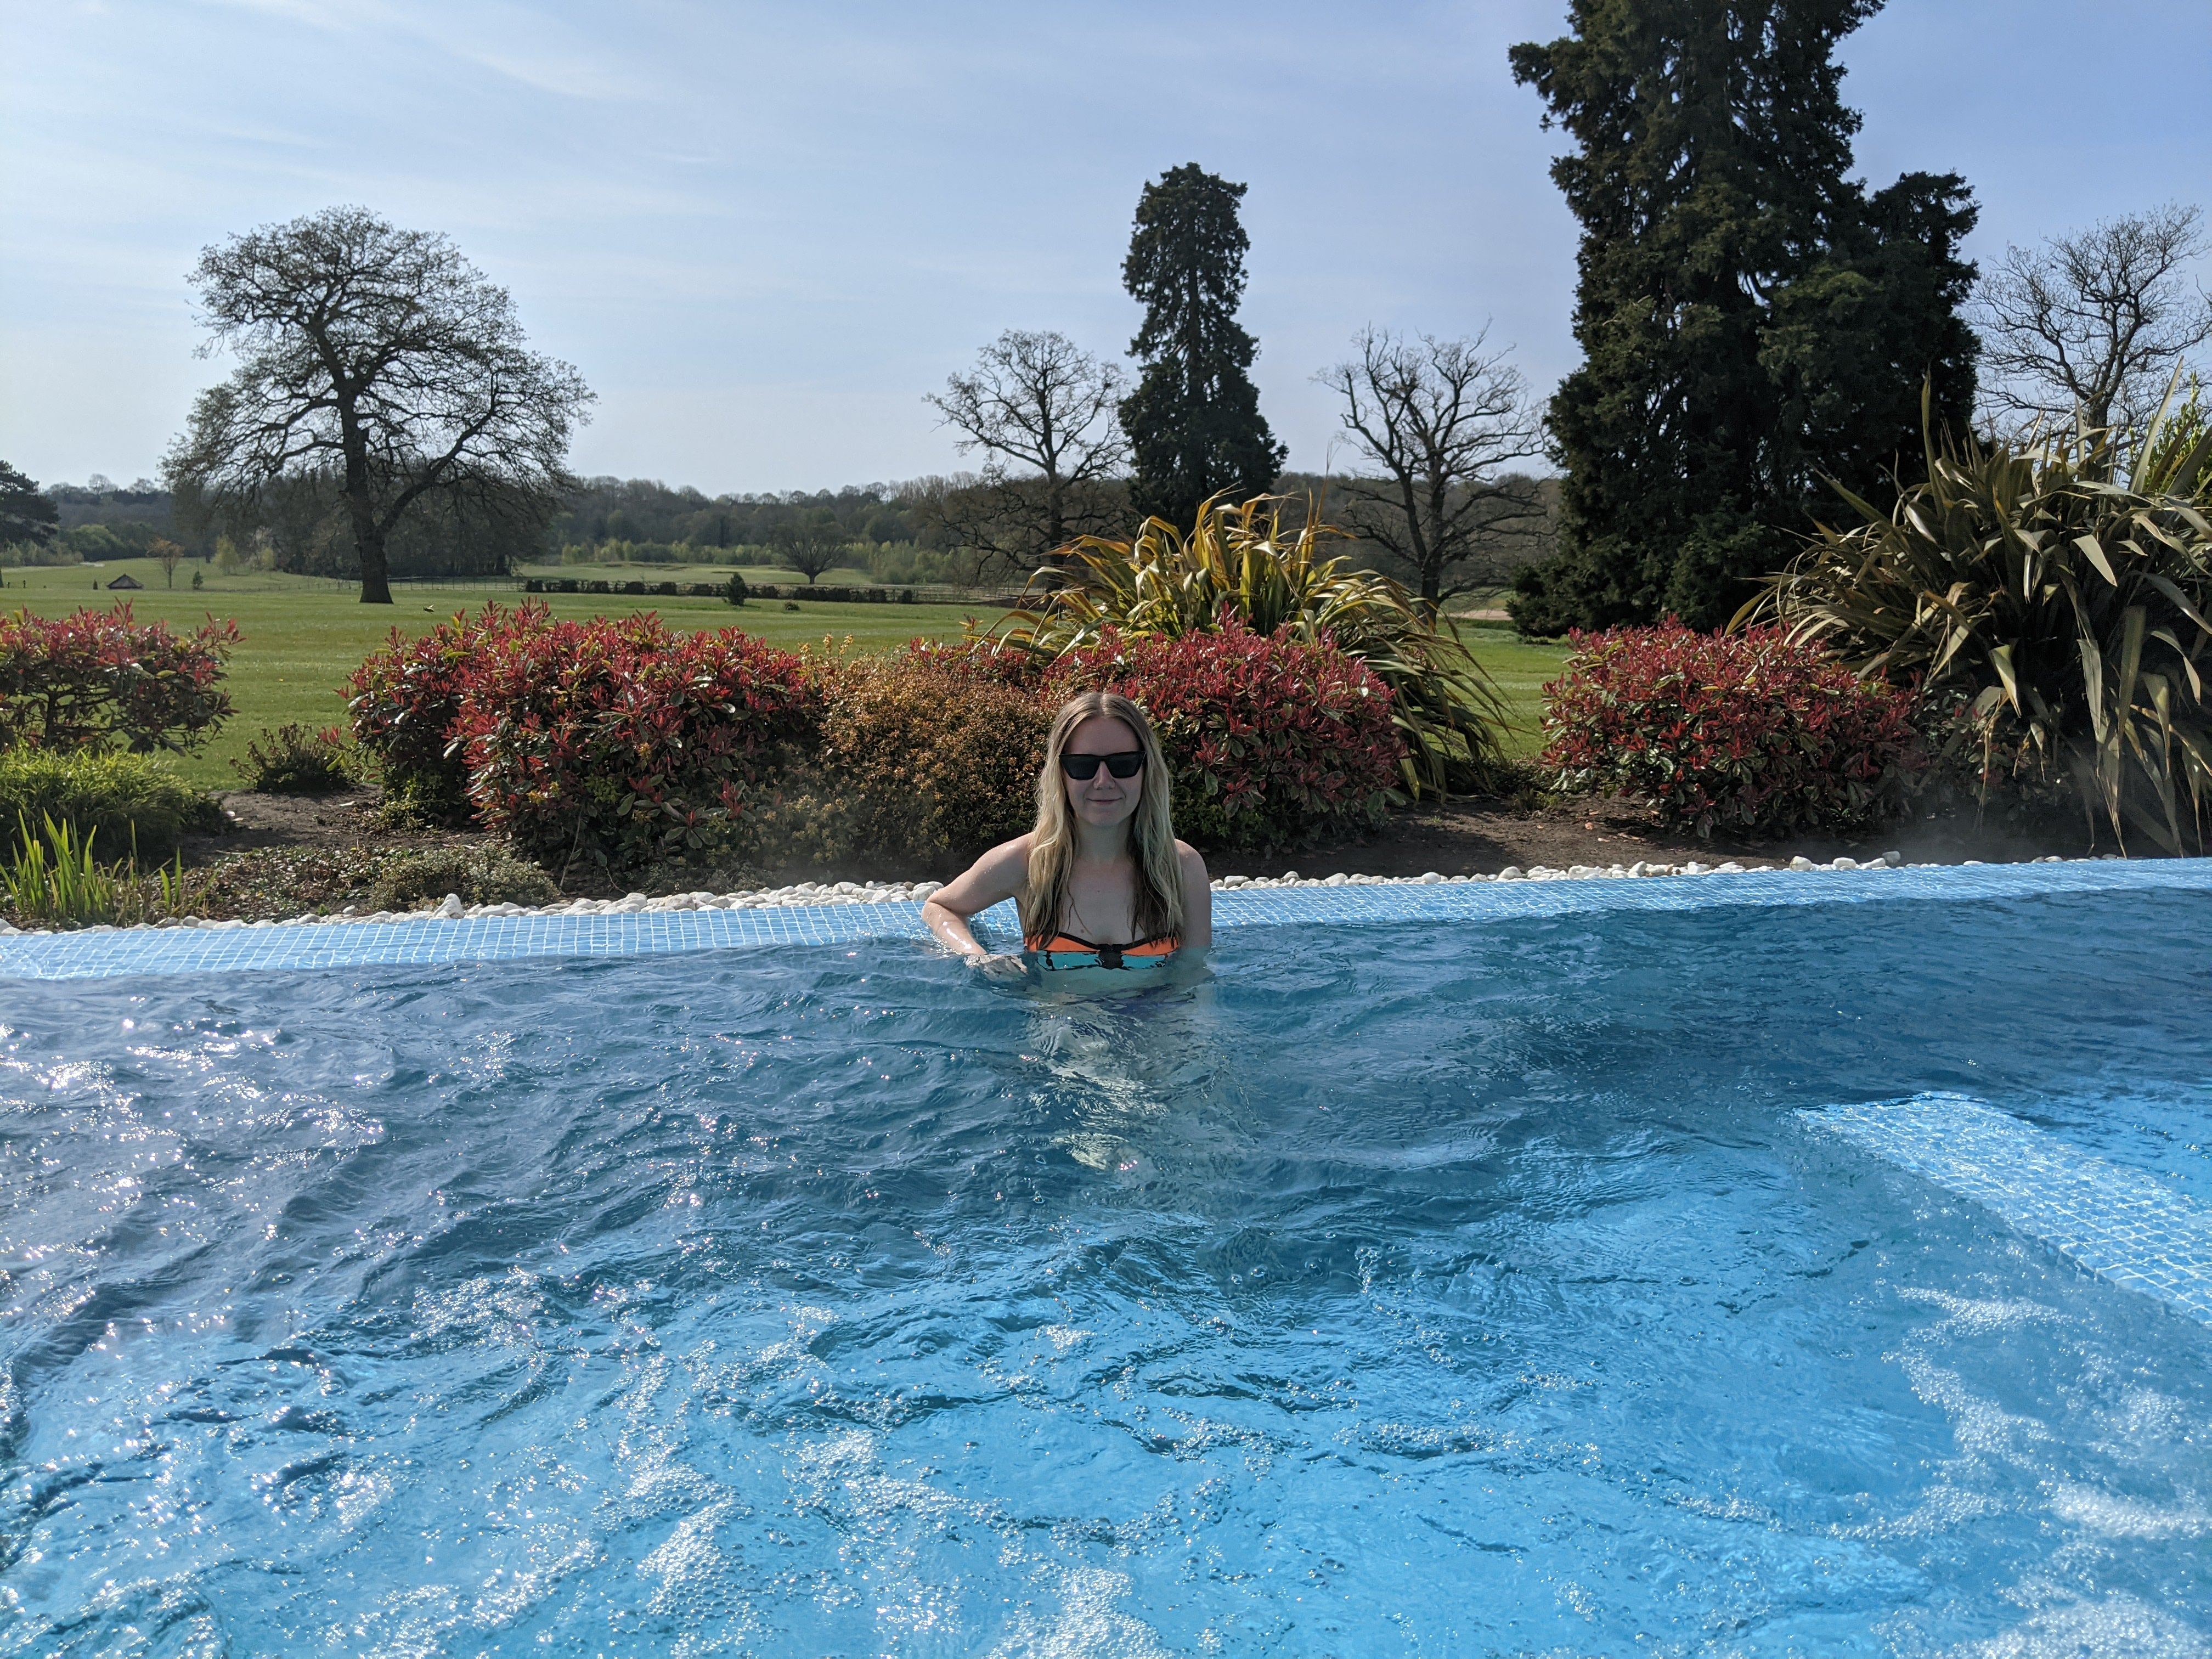 Enjoying the infinity pool at the spa garden